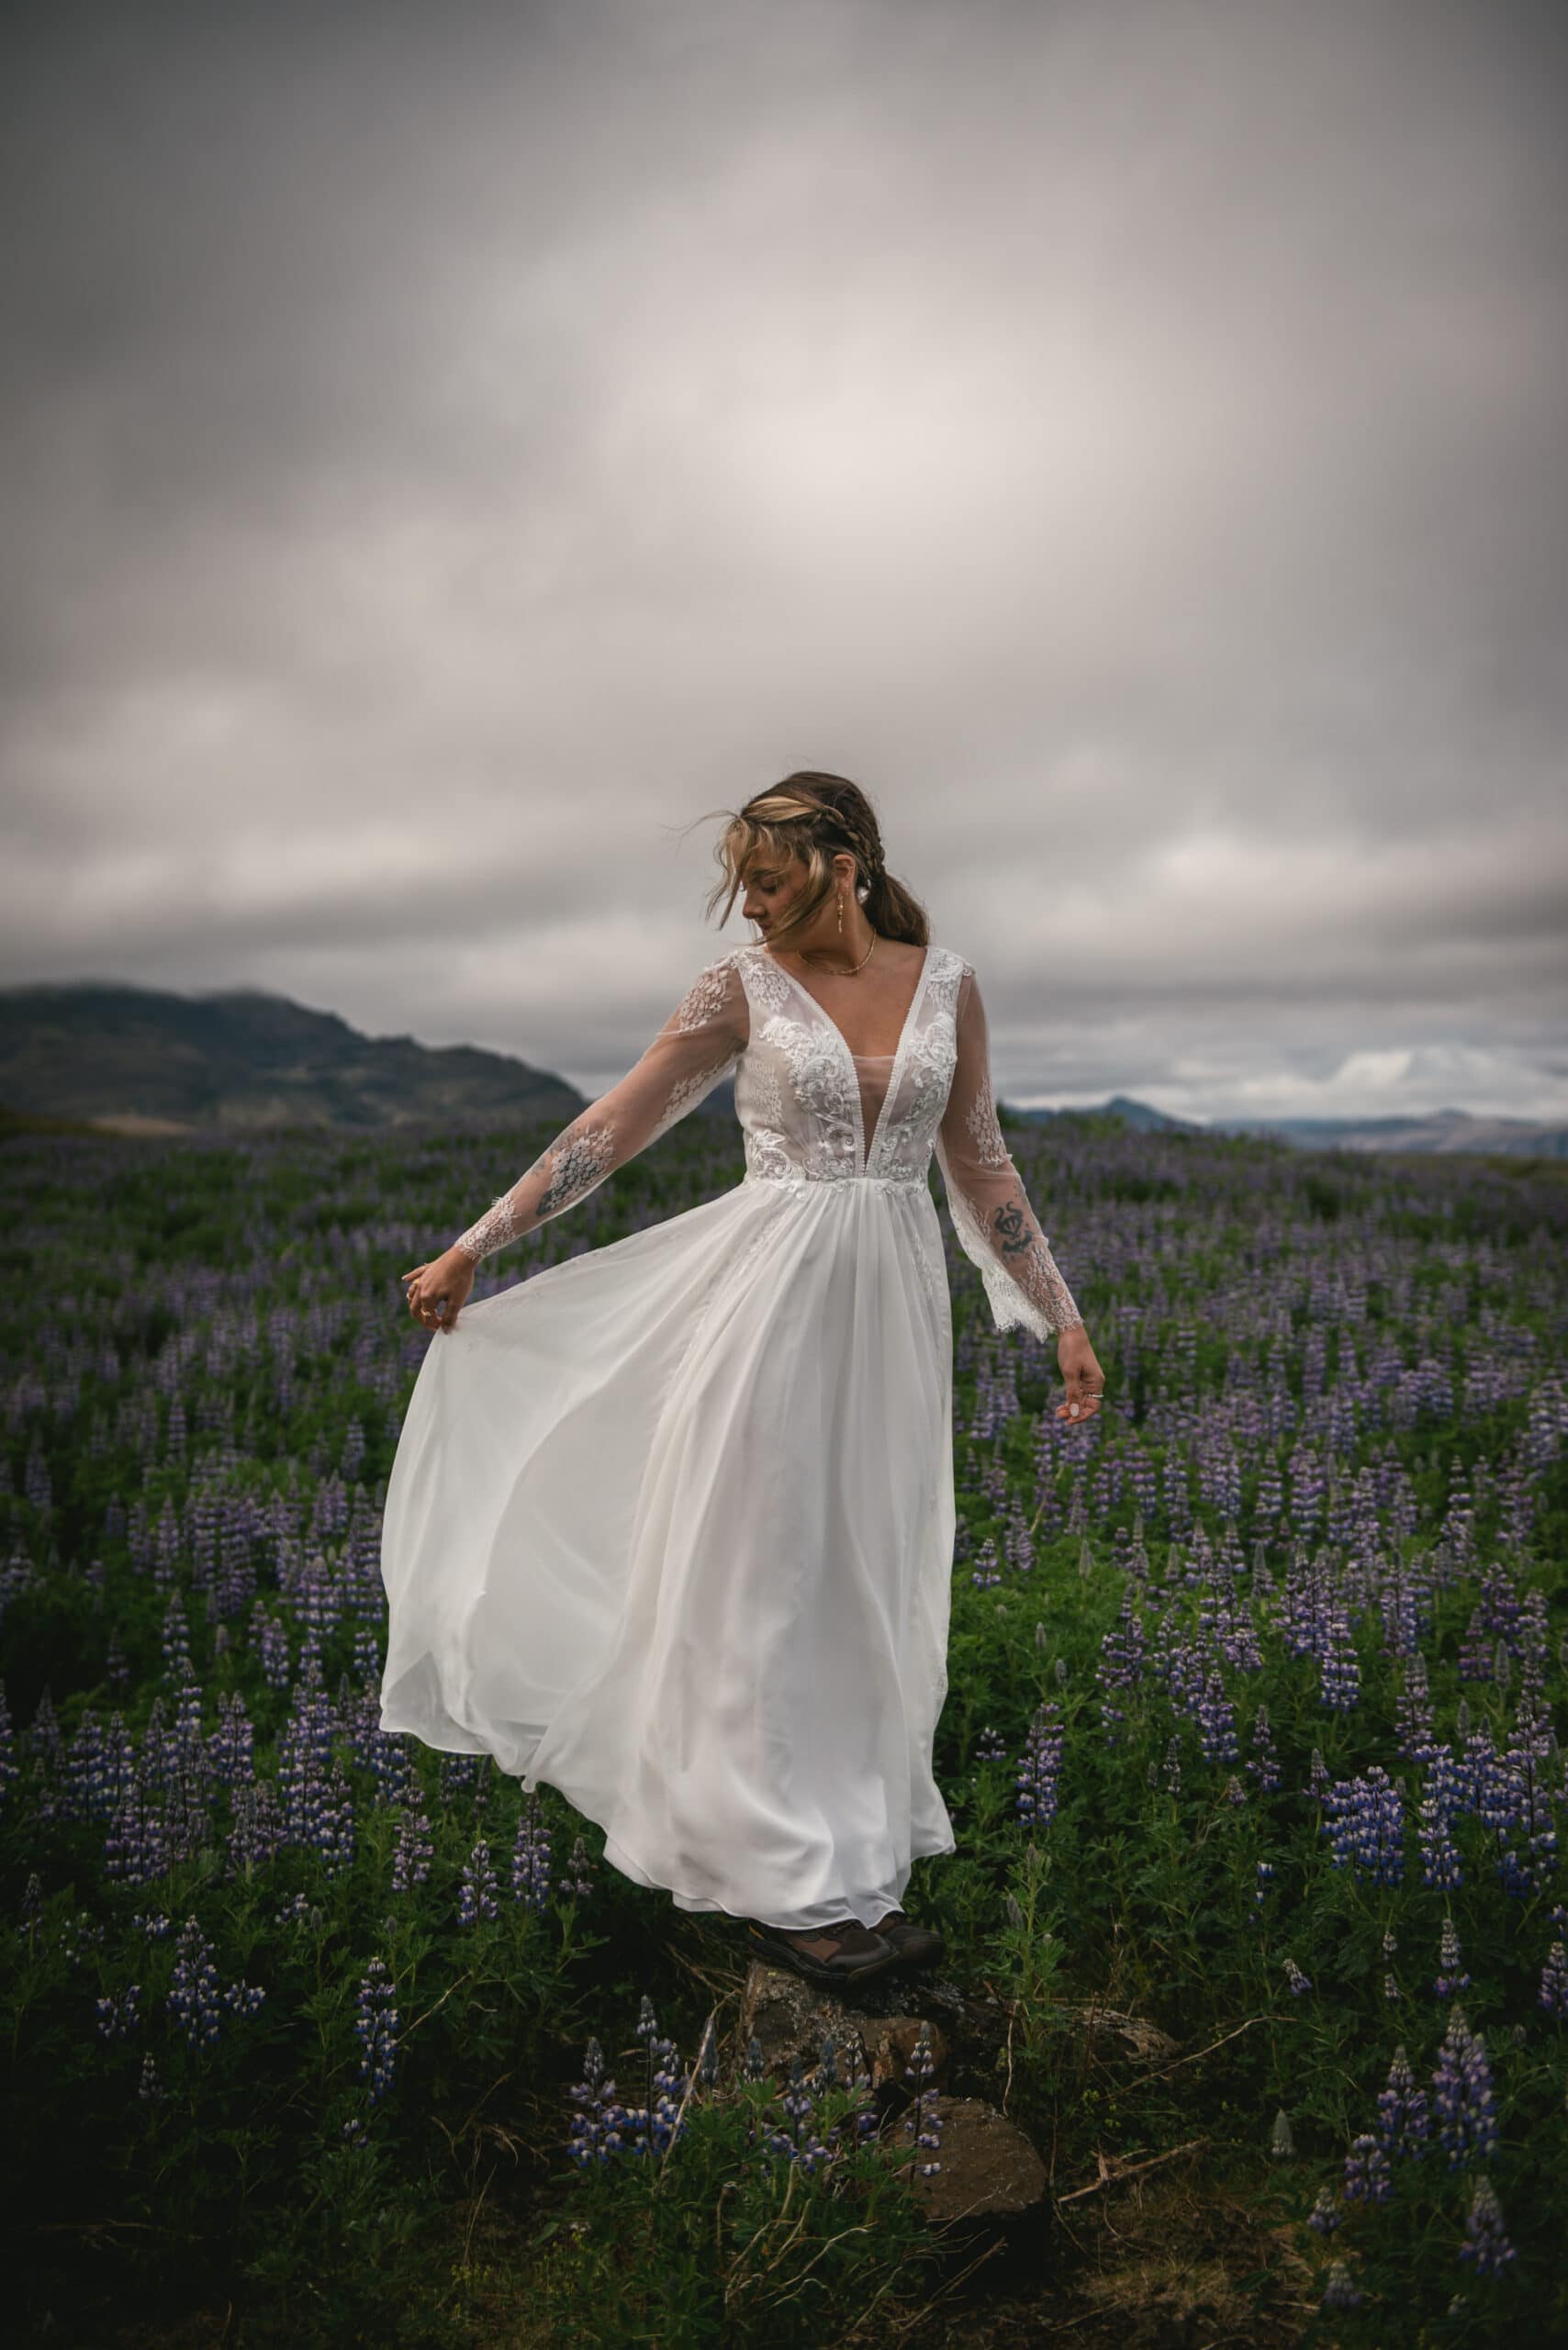 Bride's veil billows in the wind as she gazes out over the awe-inspiring Westfjords.